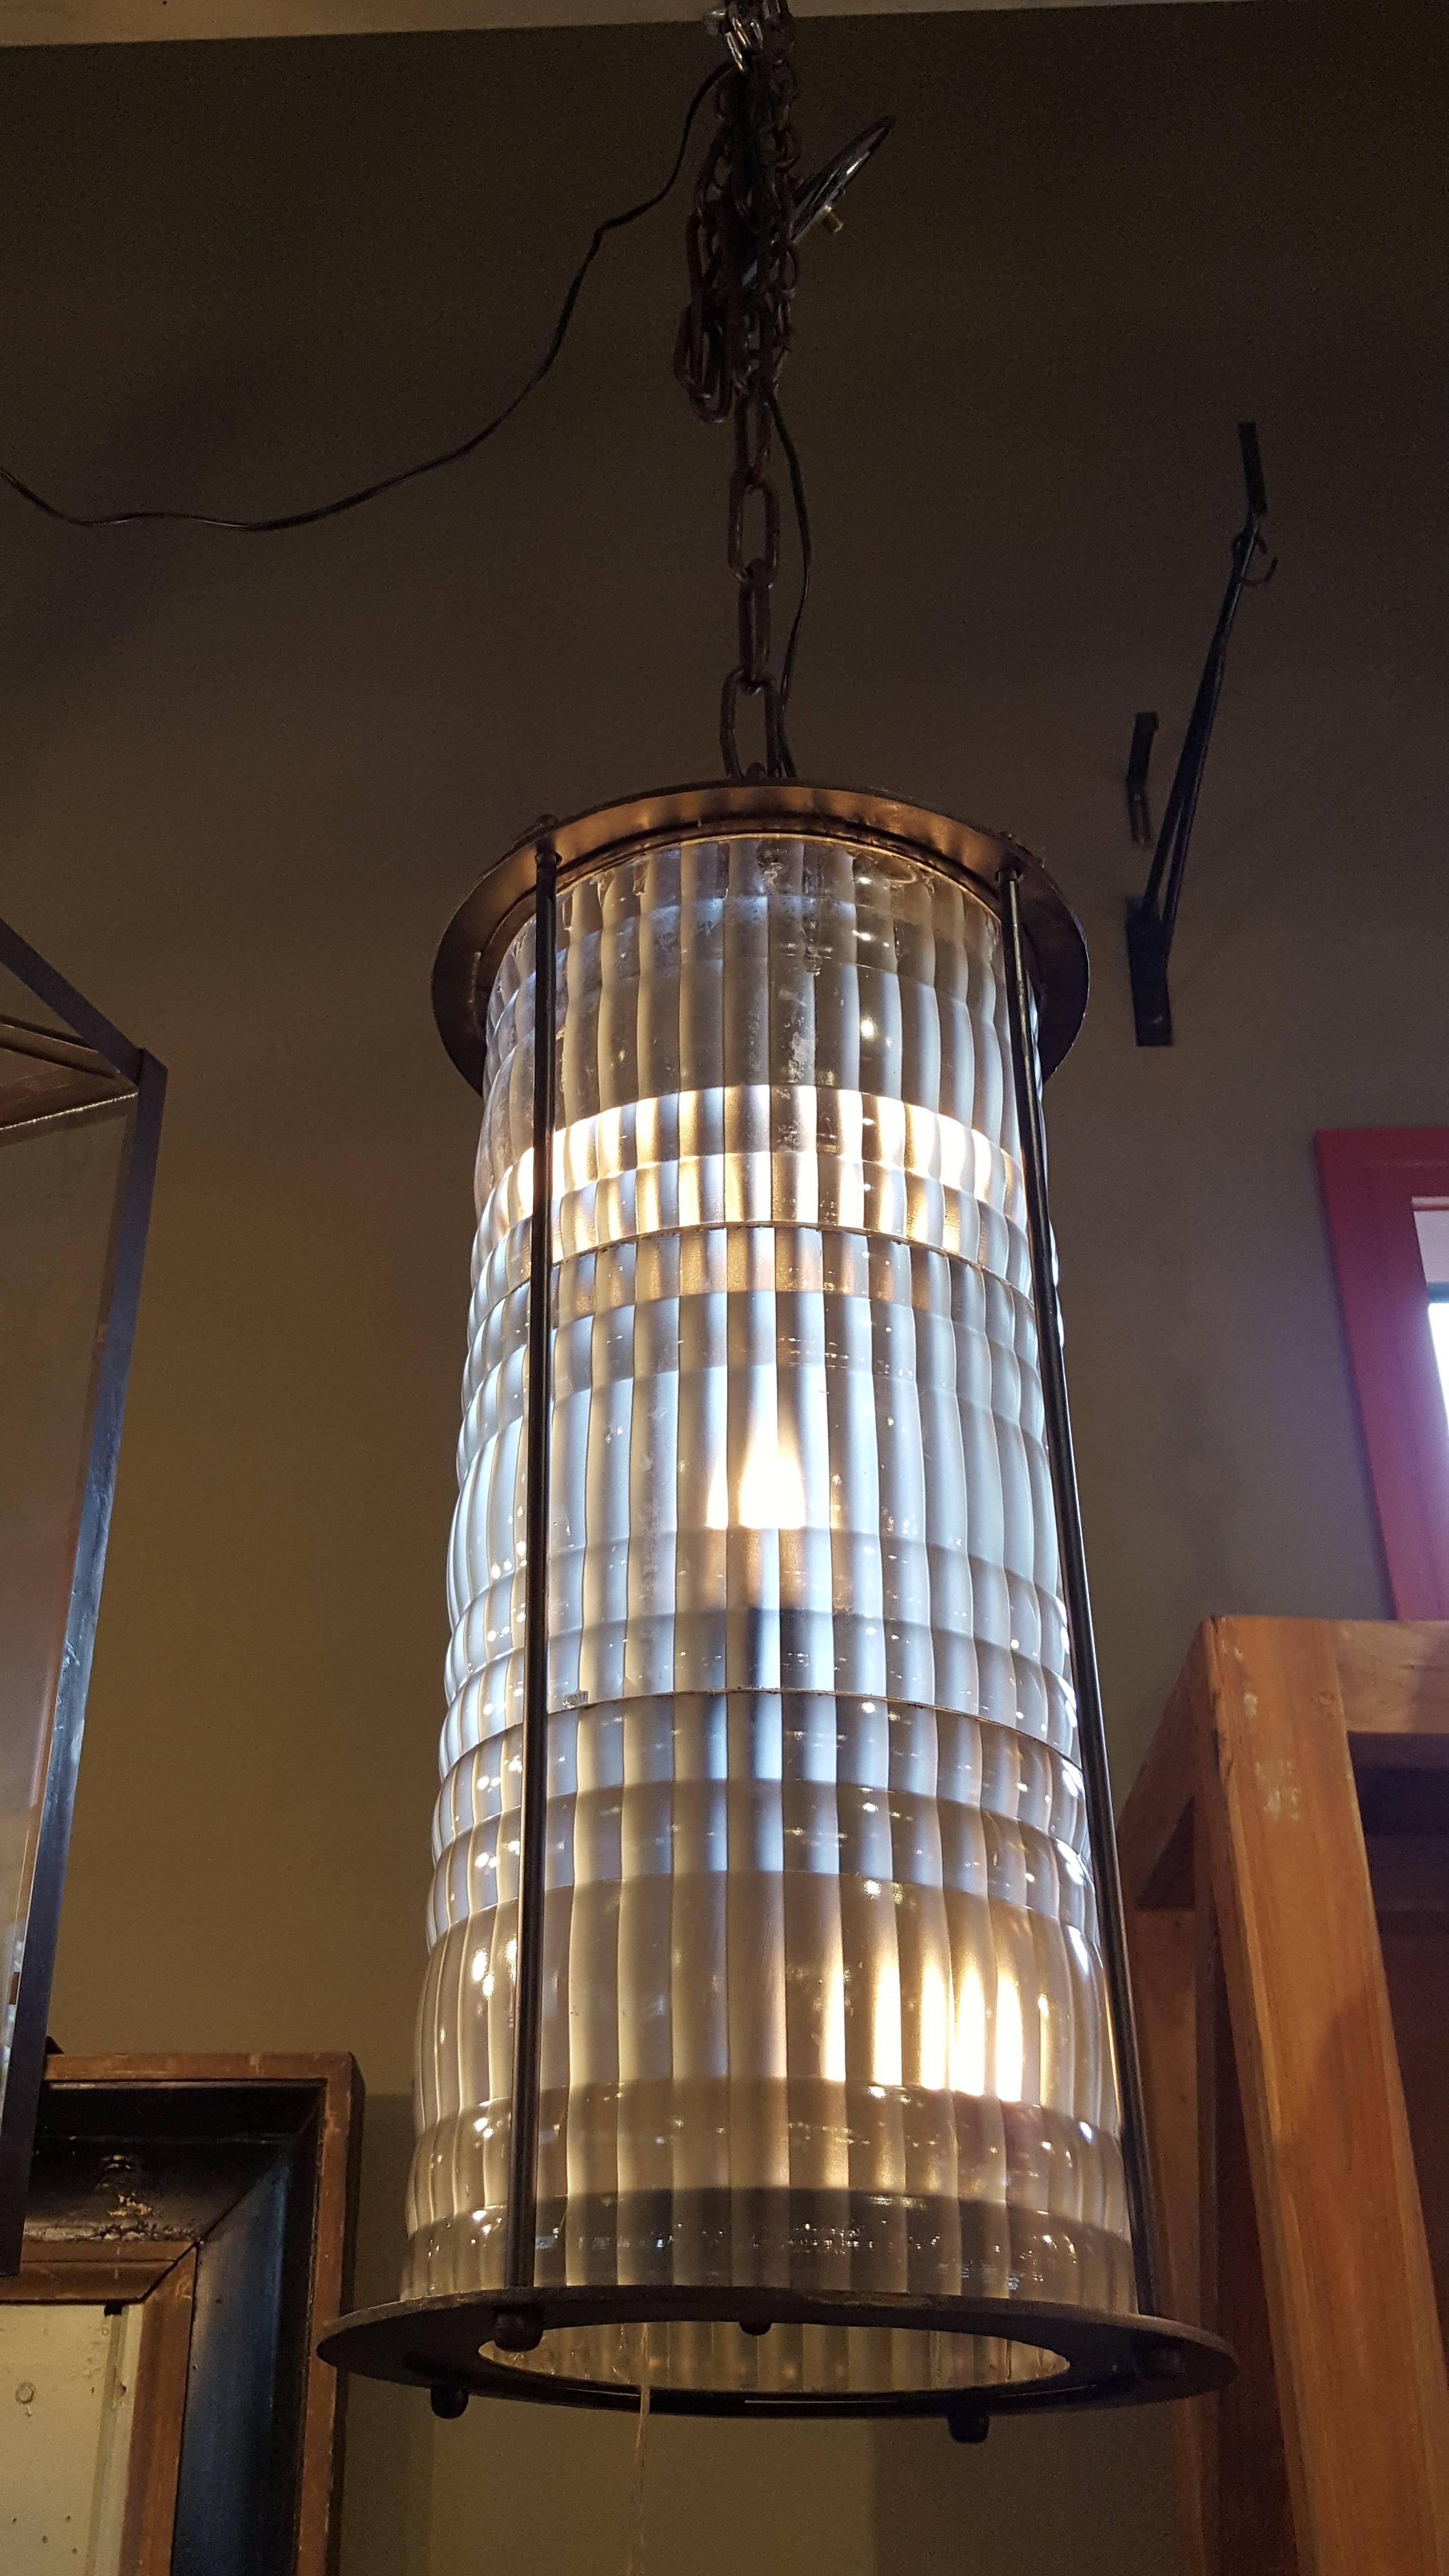 Mid-20th Century Art Deco Prismatic Glass and Iron Lantern from France, circa 1940